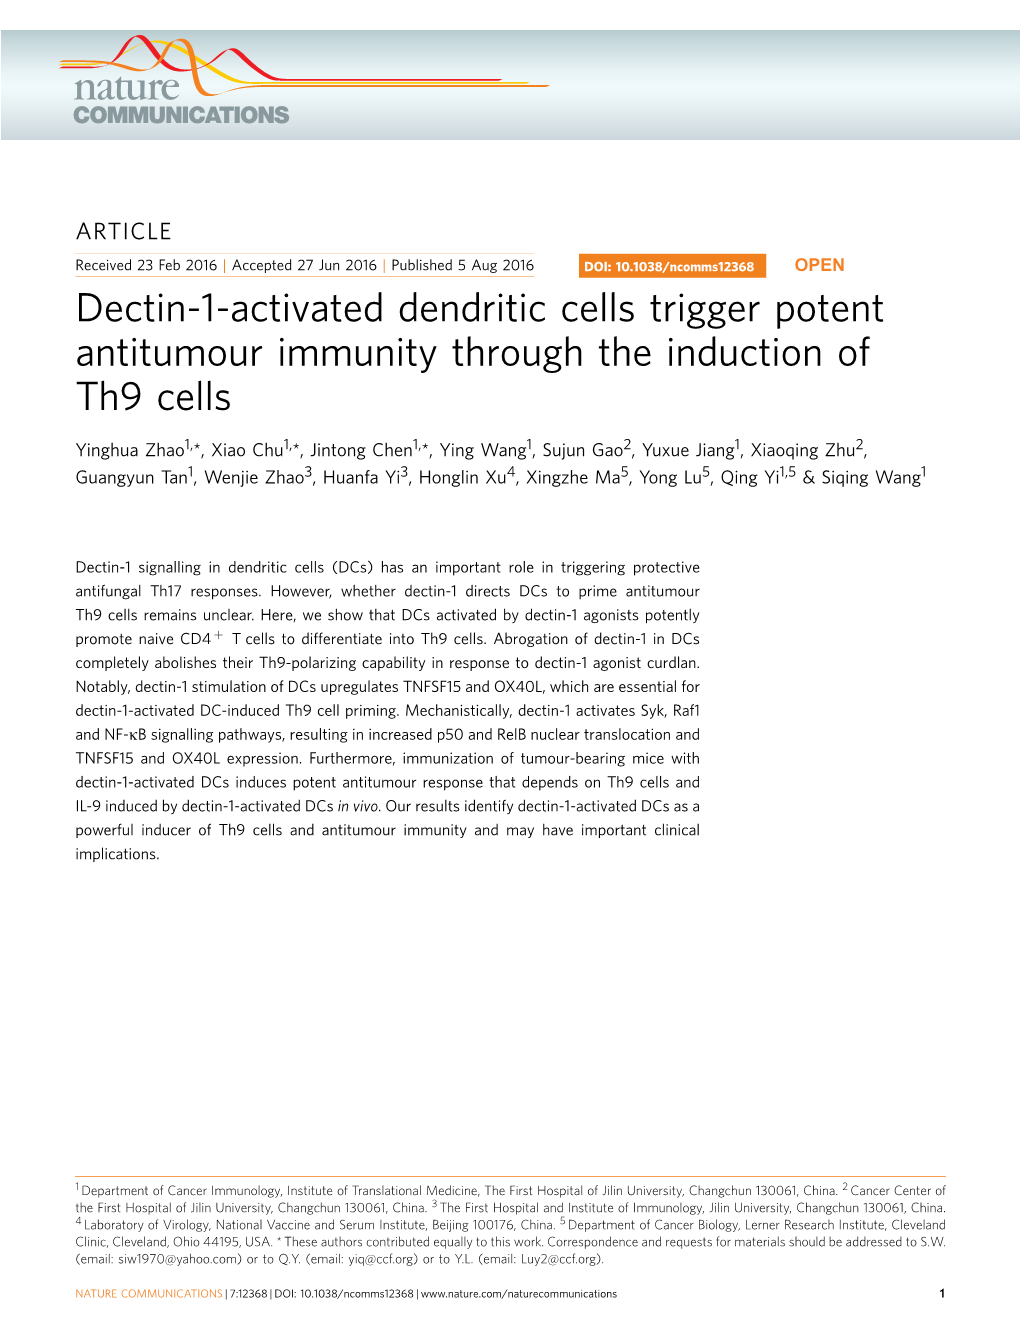 Dectin-1-Activated Dendritic Cells Trigger Potent Antitumour Immunity Through the Induction of Th9 Cells